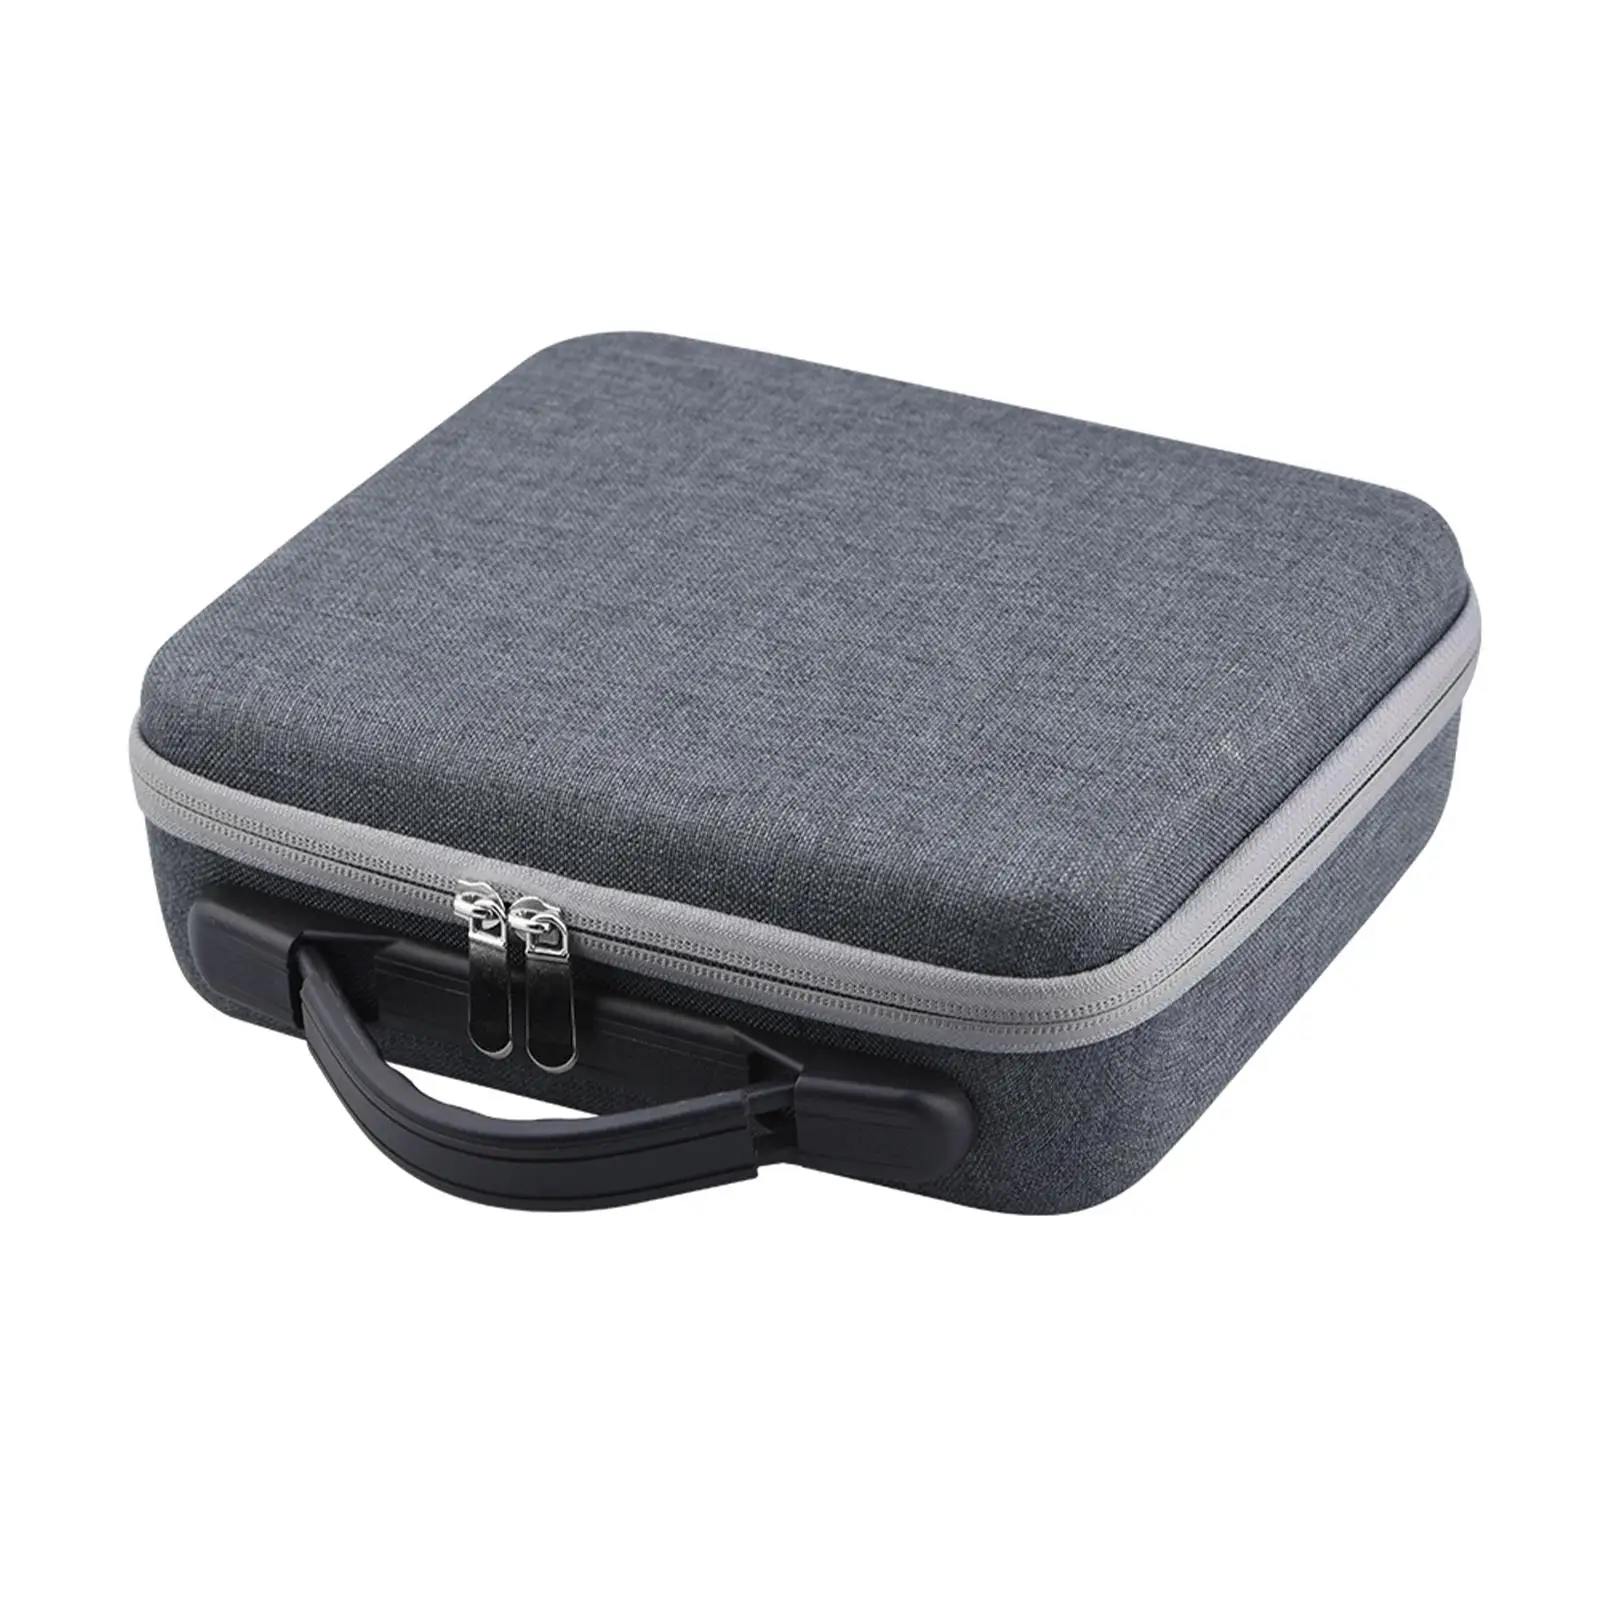 Portable Carrying Case Dustproof with Handle Large Capacity Protective Action Camera Accessories Handbag